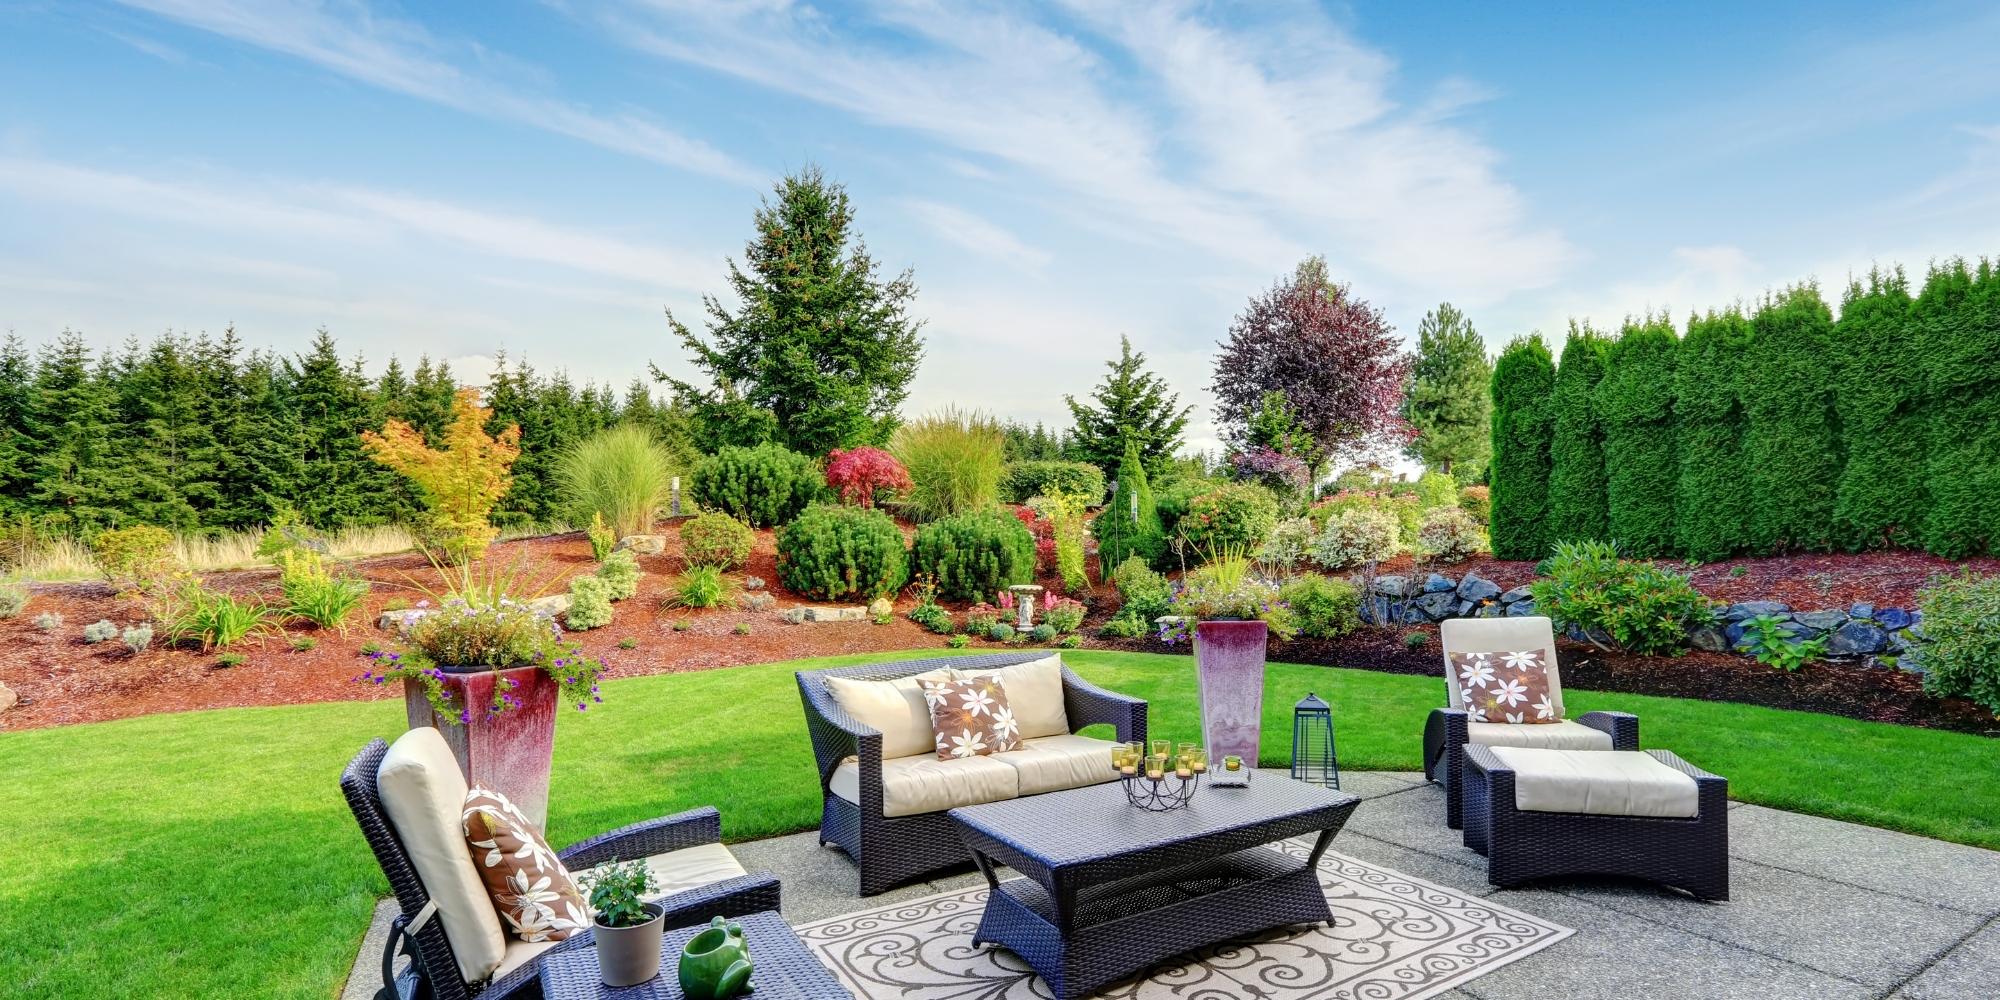 Why You Should Consider a Complete Backyard Renovation